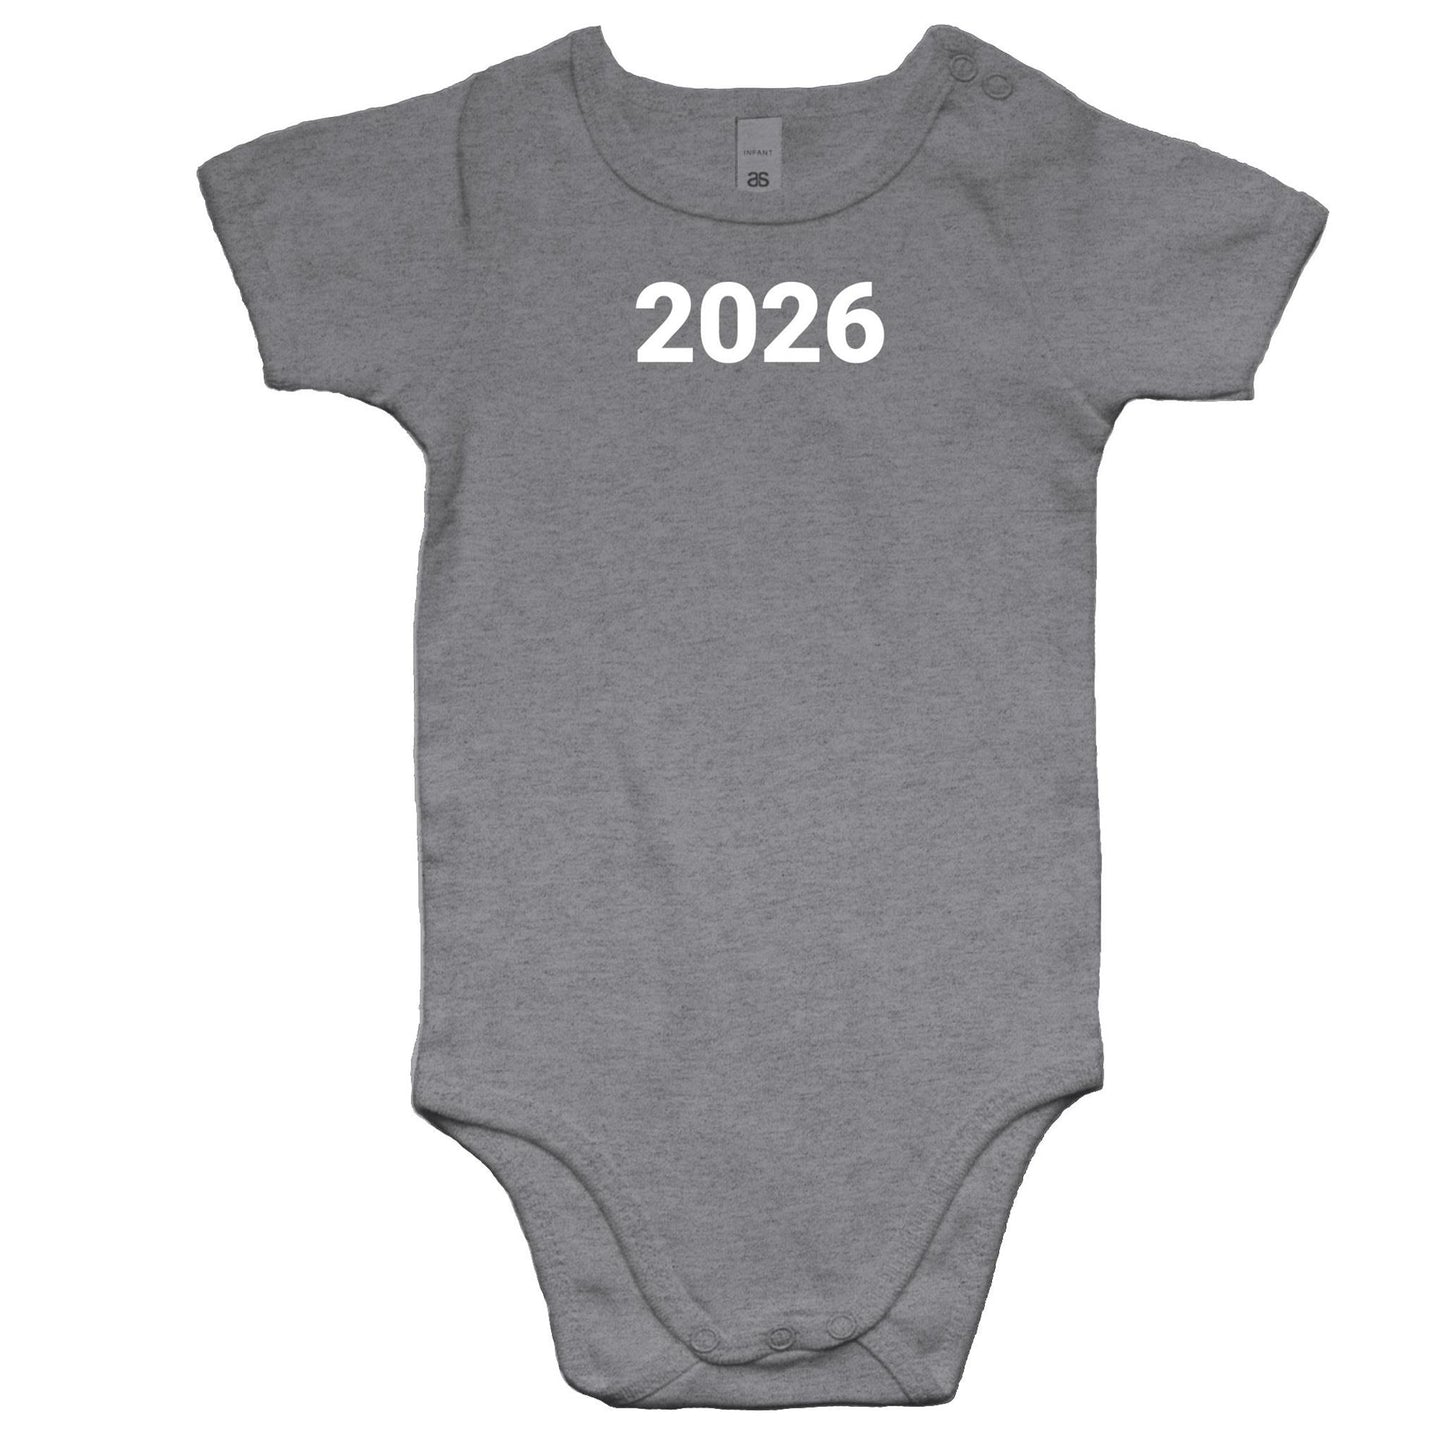 2026 Rompers for Babies